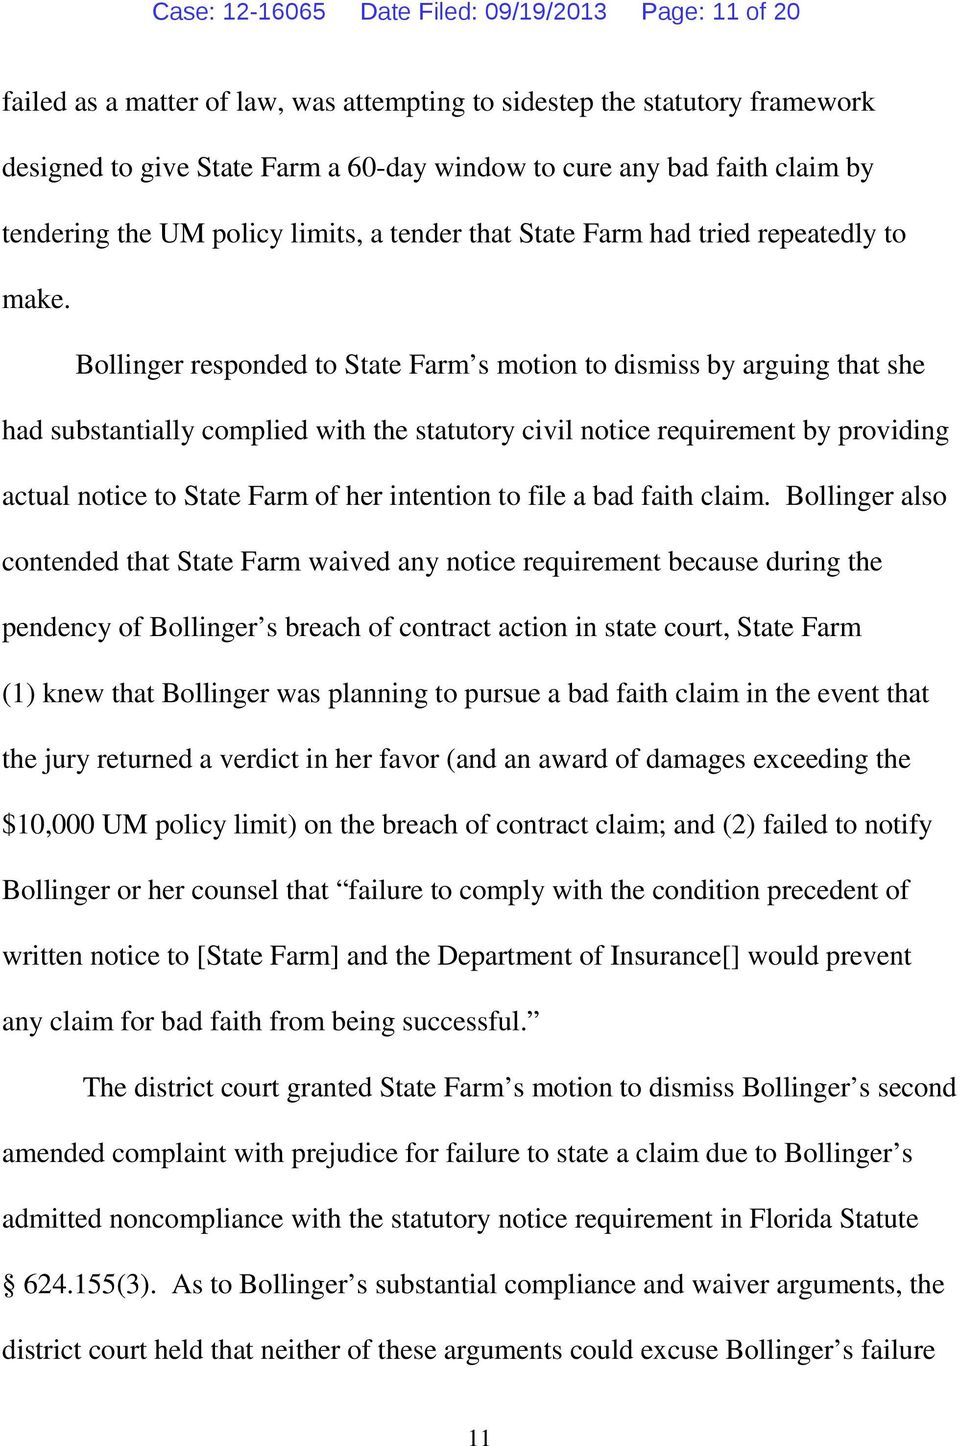 Bollinger responded to State Farm s motion to dismiss by arguing that she had substantially complied with the statutory civil notice requirement by providing actual notice to State Farm of her